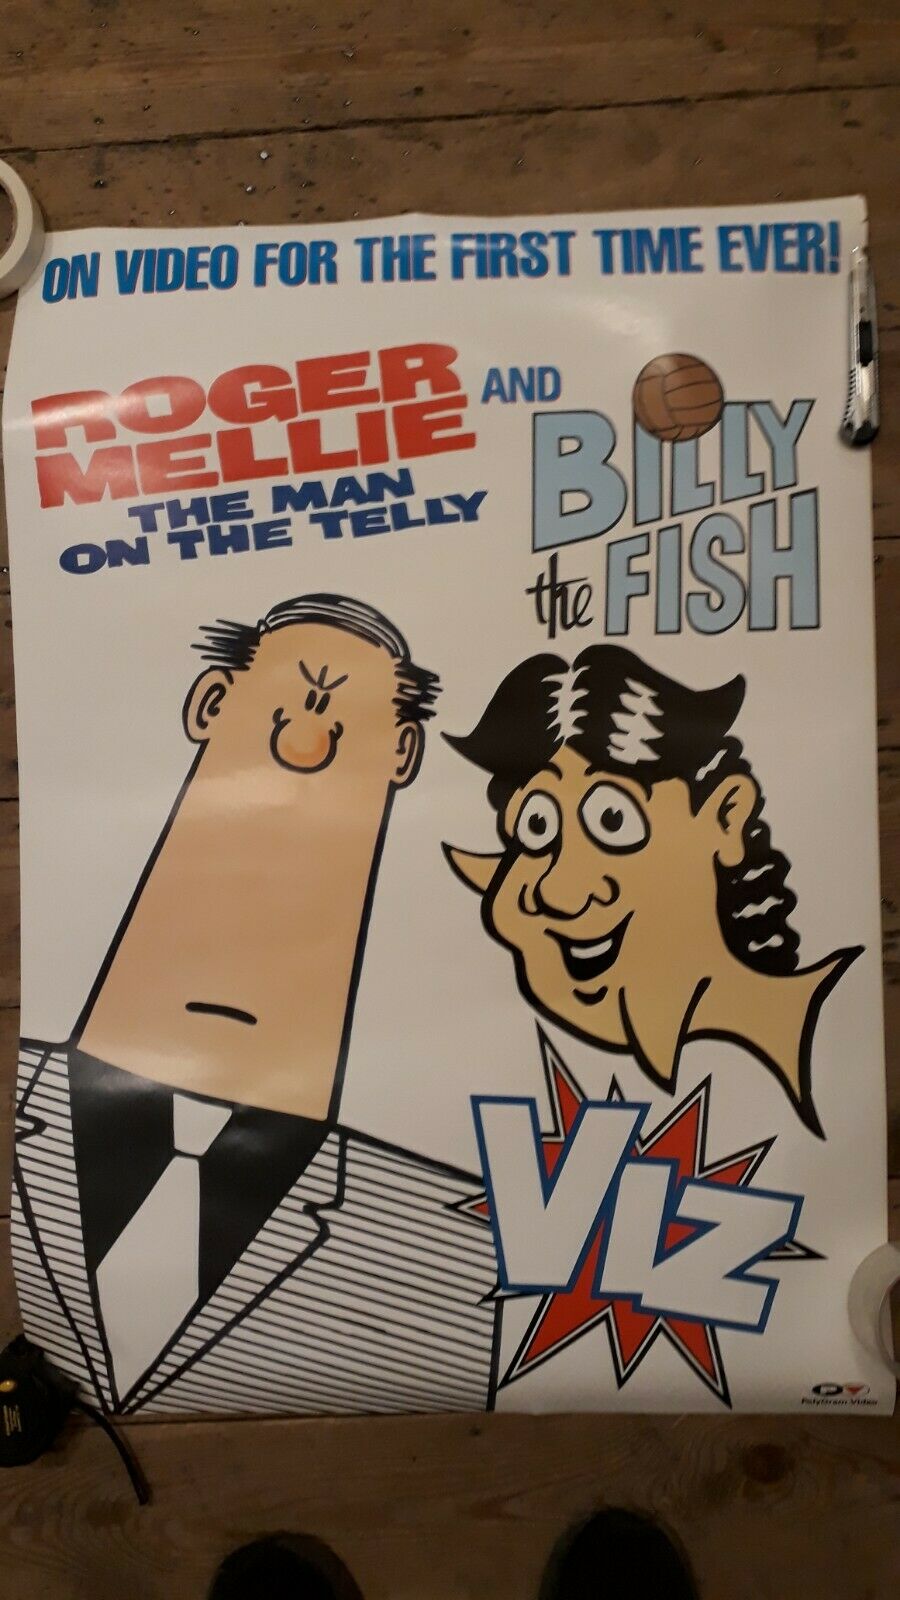 Viz original promotional poster - Roger Mellie & Billy the Fish 1980`s Video - Original Music and Movie Posters for sale from Bamalama - Online Poster Store UK London